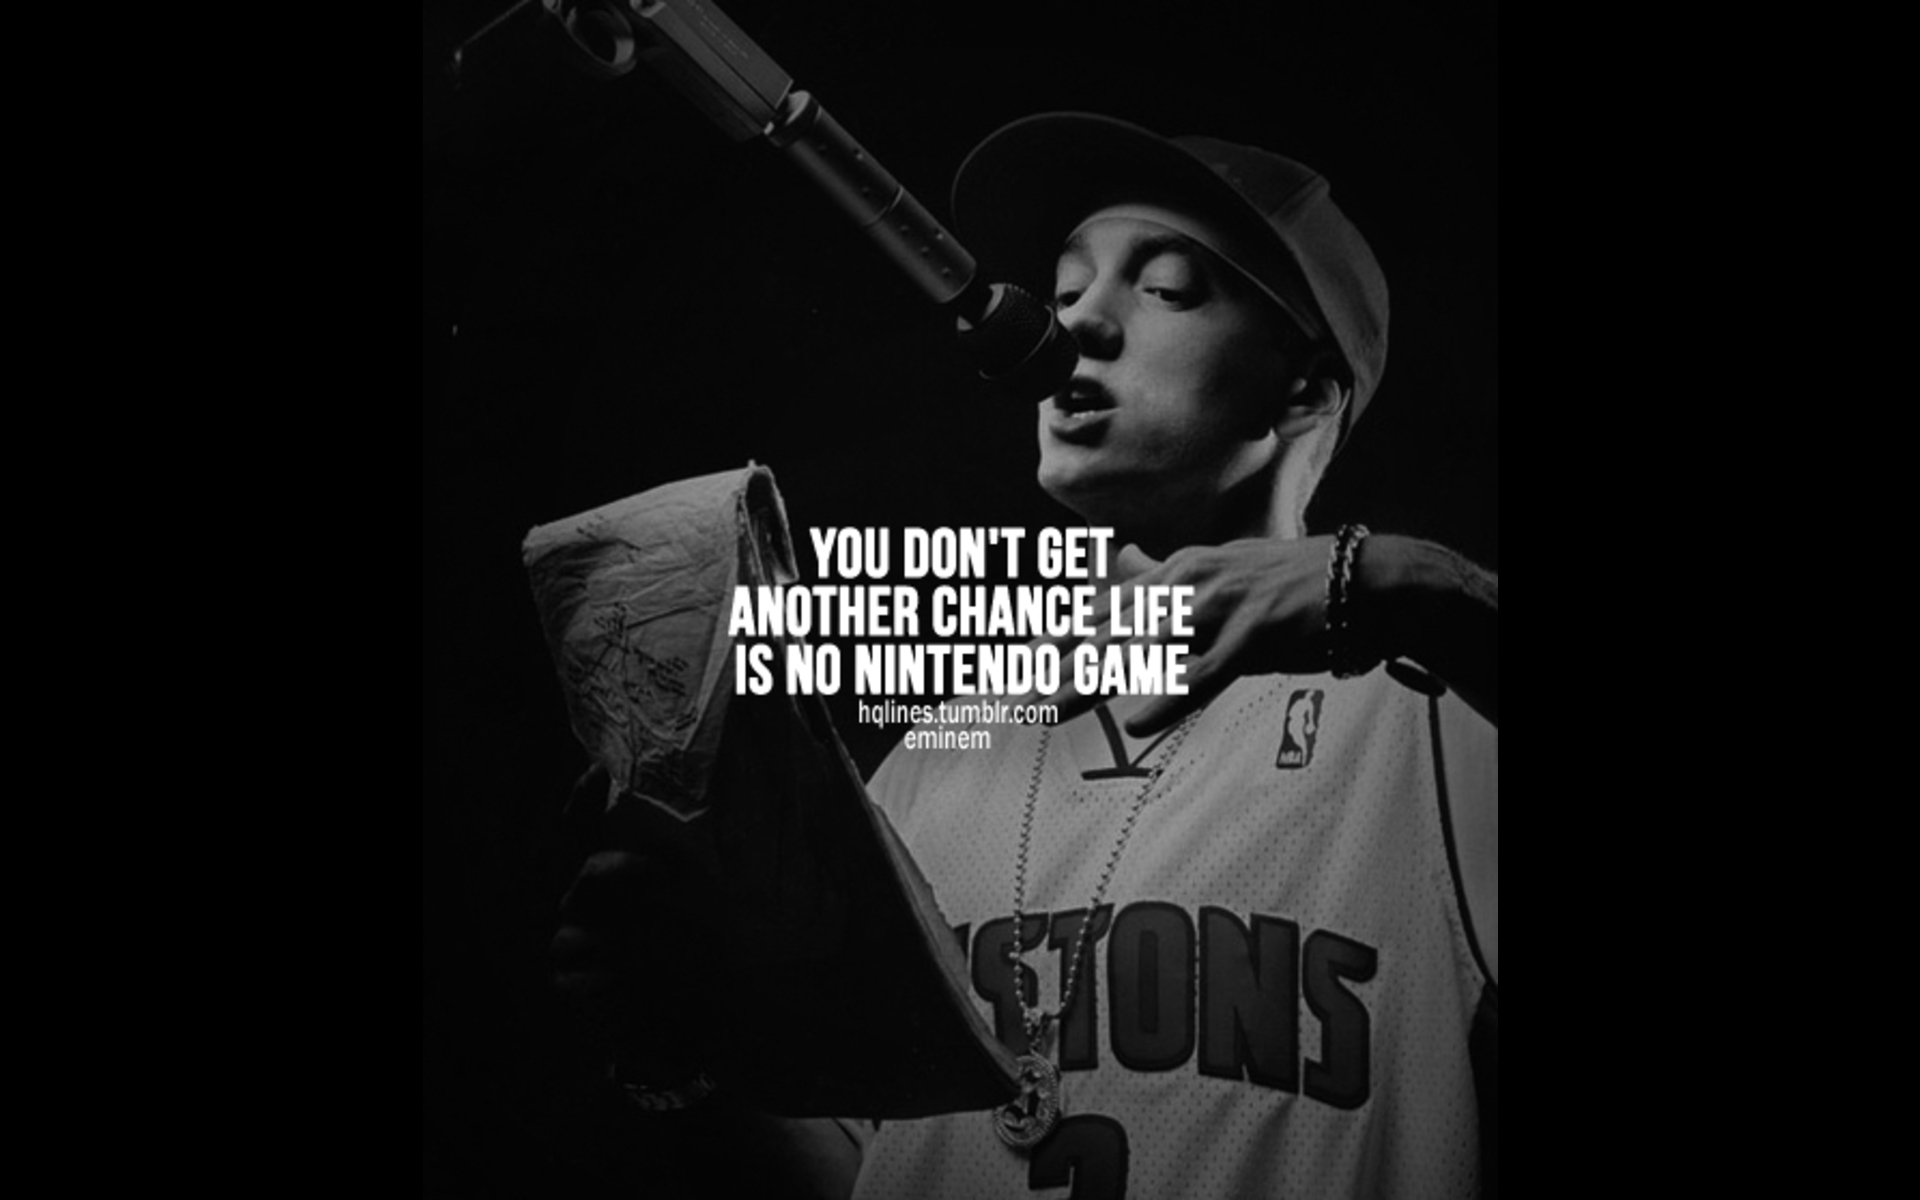 Eminem Wallpapers HD quotes